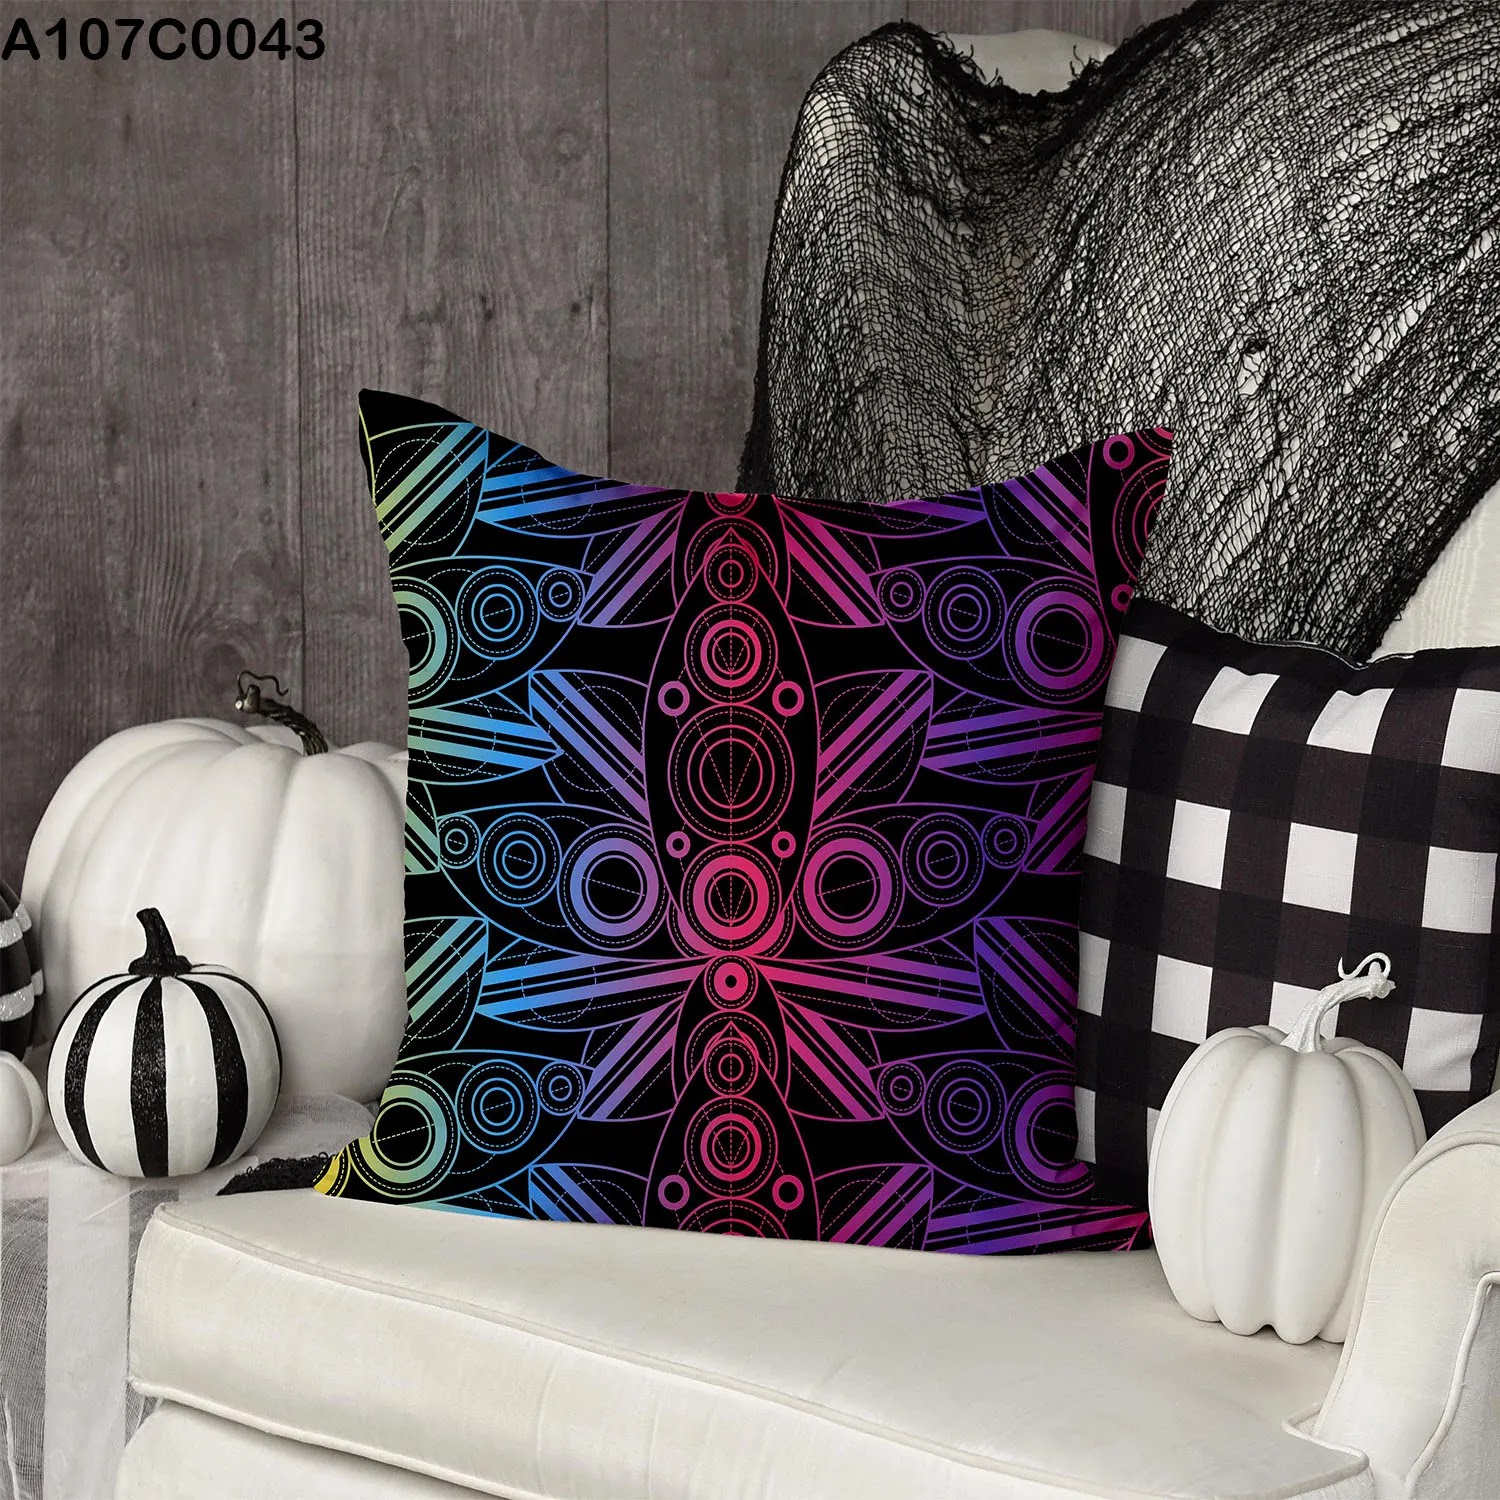 Black pillow case with colored drawing shapes